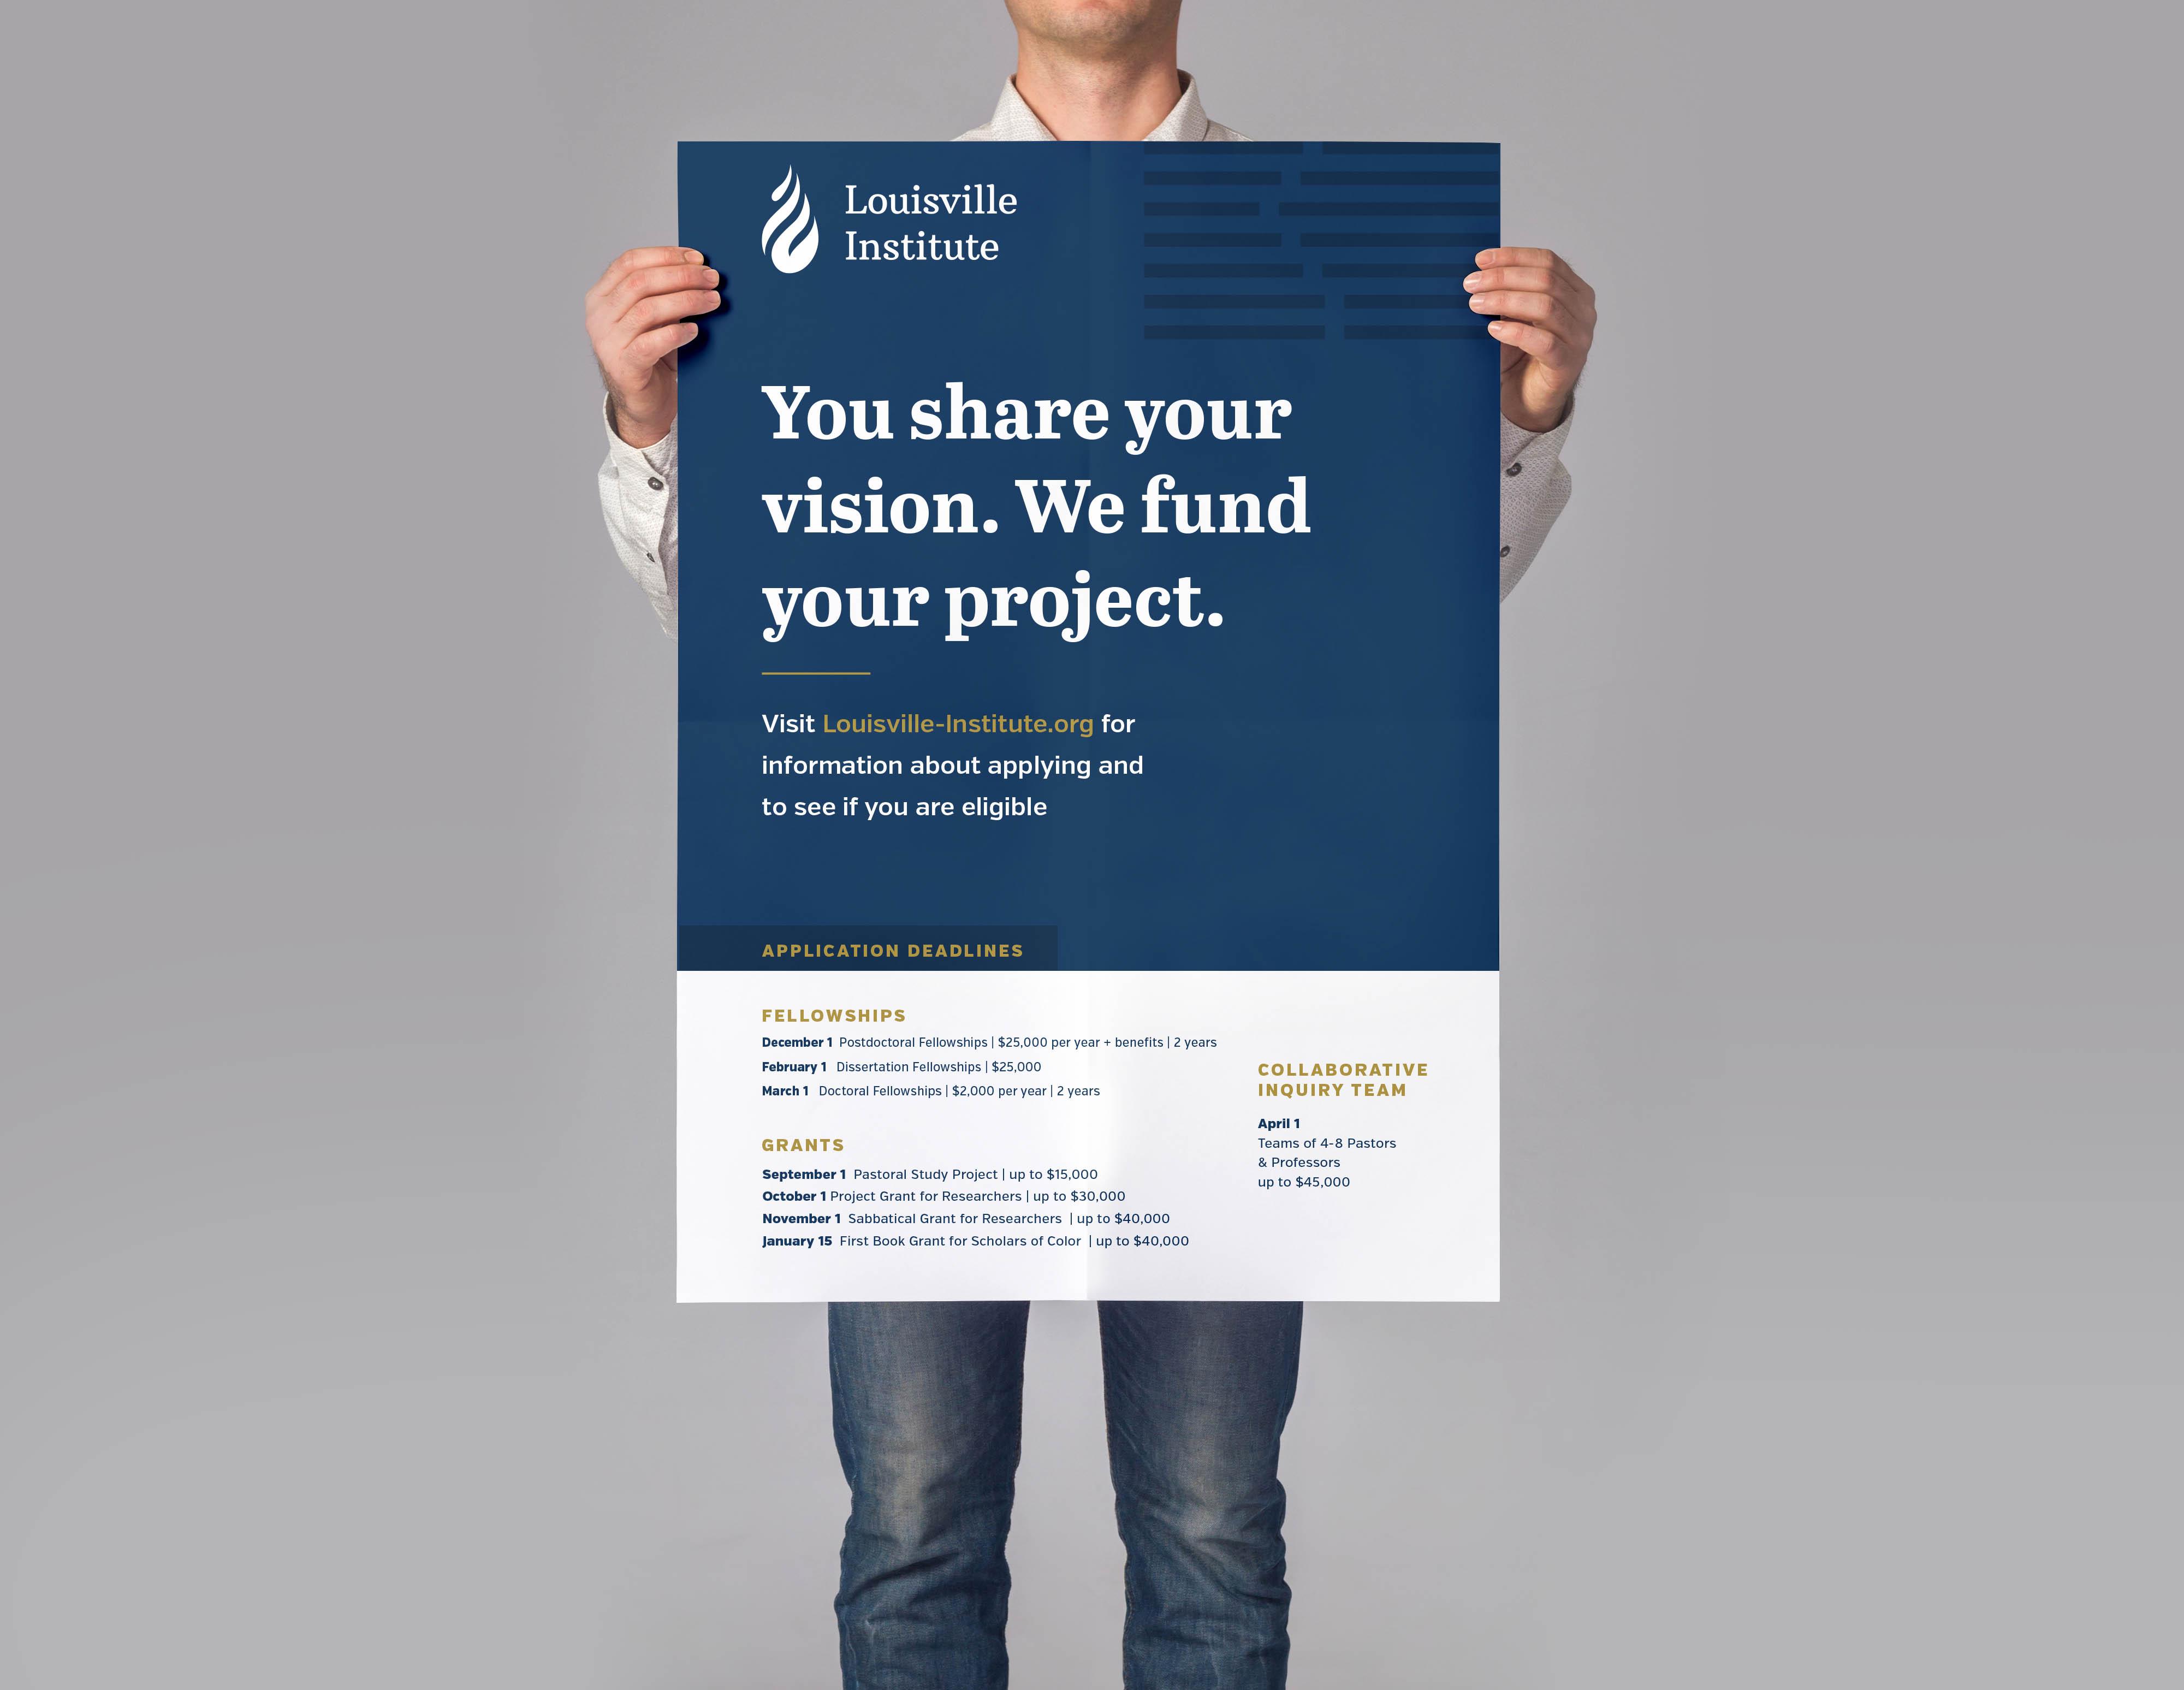 Louisville Institute poster. "We share your vision. We fund your project."